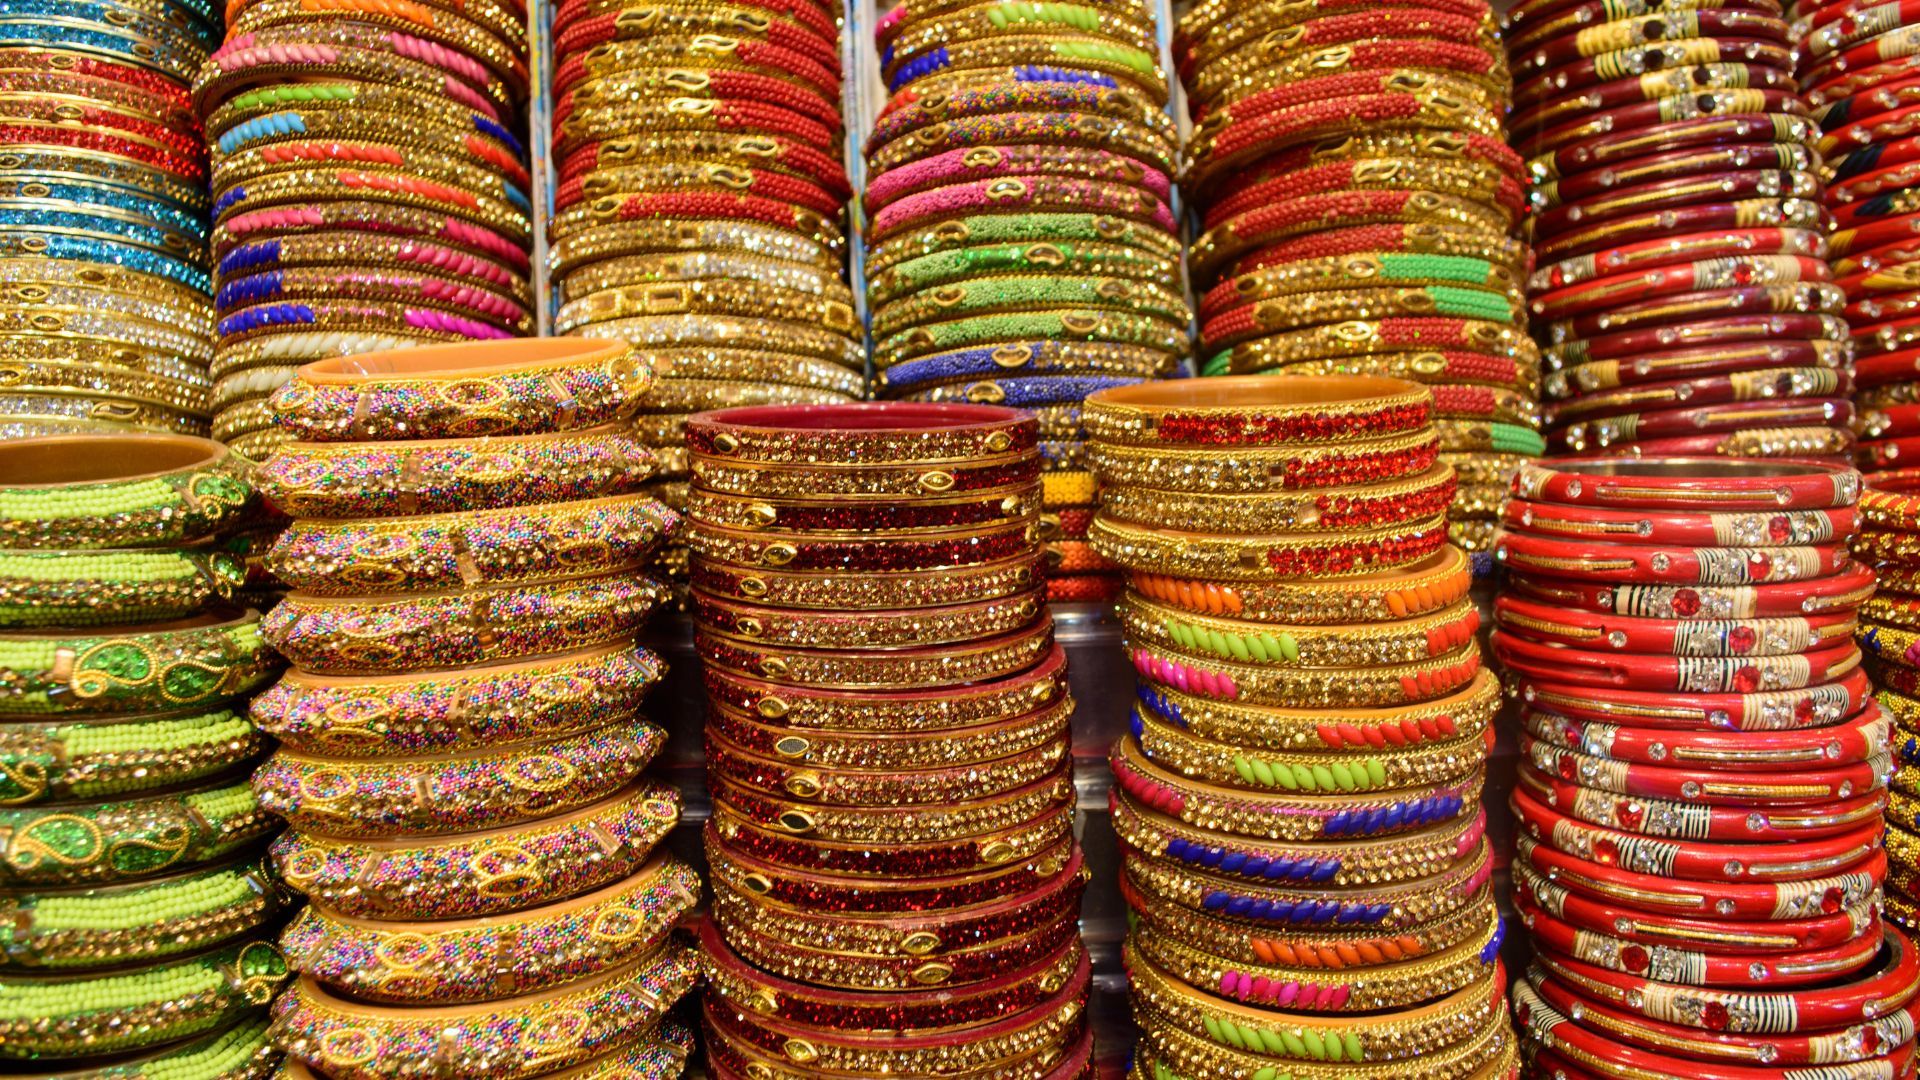 Shopping in Jaipur's Iconic Markets: Guide to Rajasthani Retail Revelry